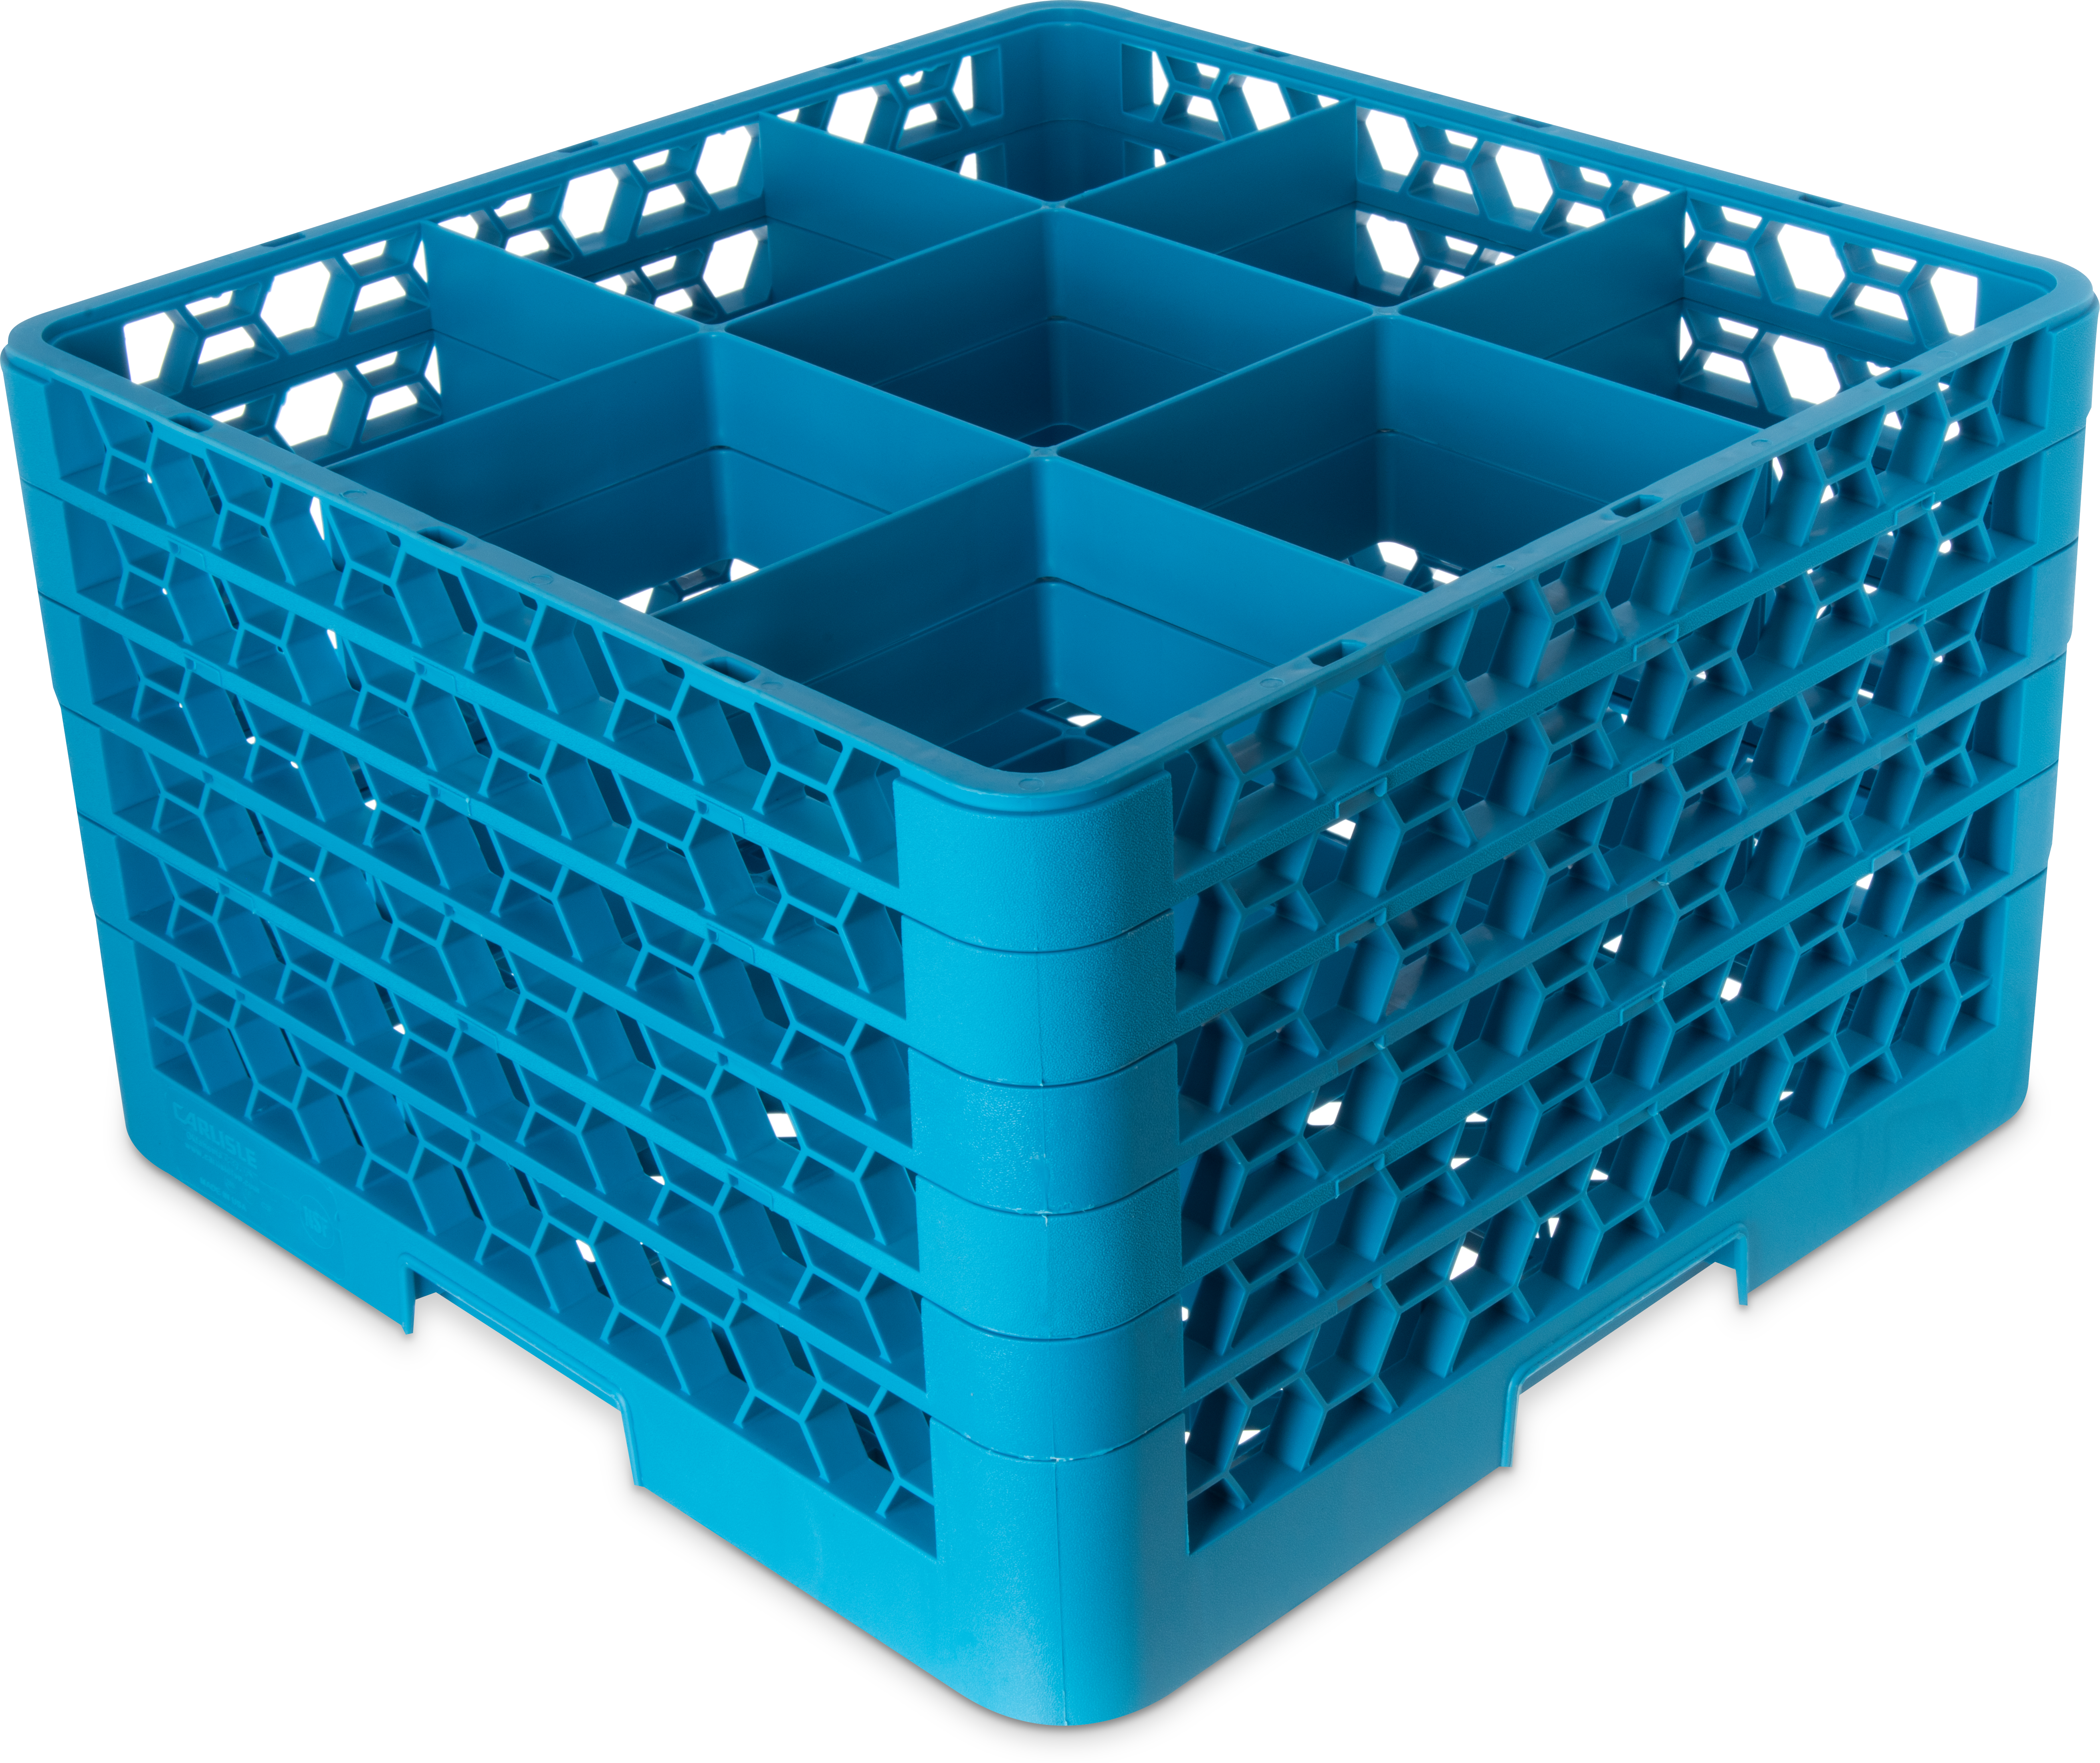 OptiClean 9 Compartment Glass Rack with 5 Extenders 11.9 - Carlisle Blue